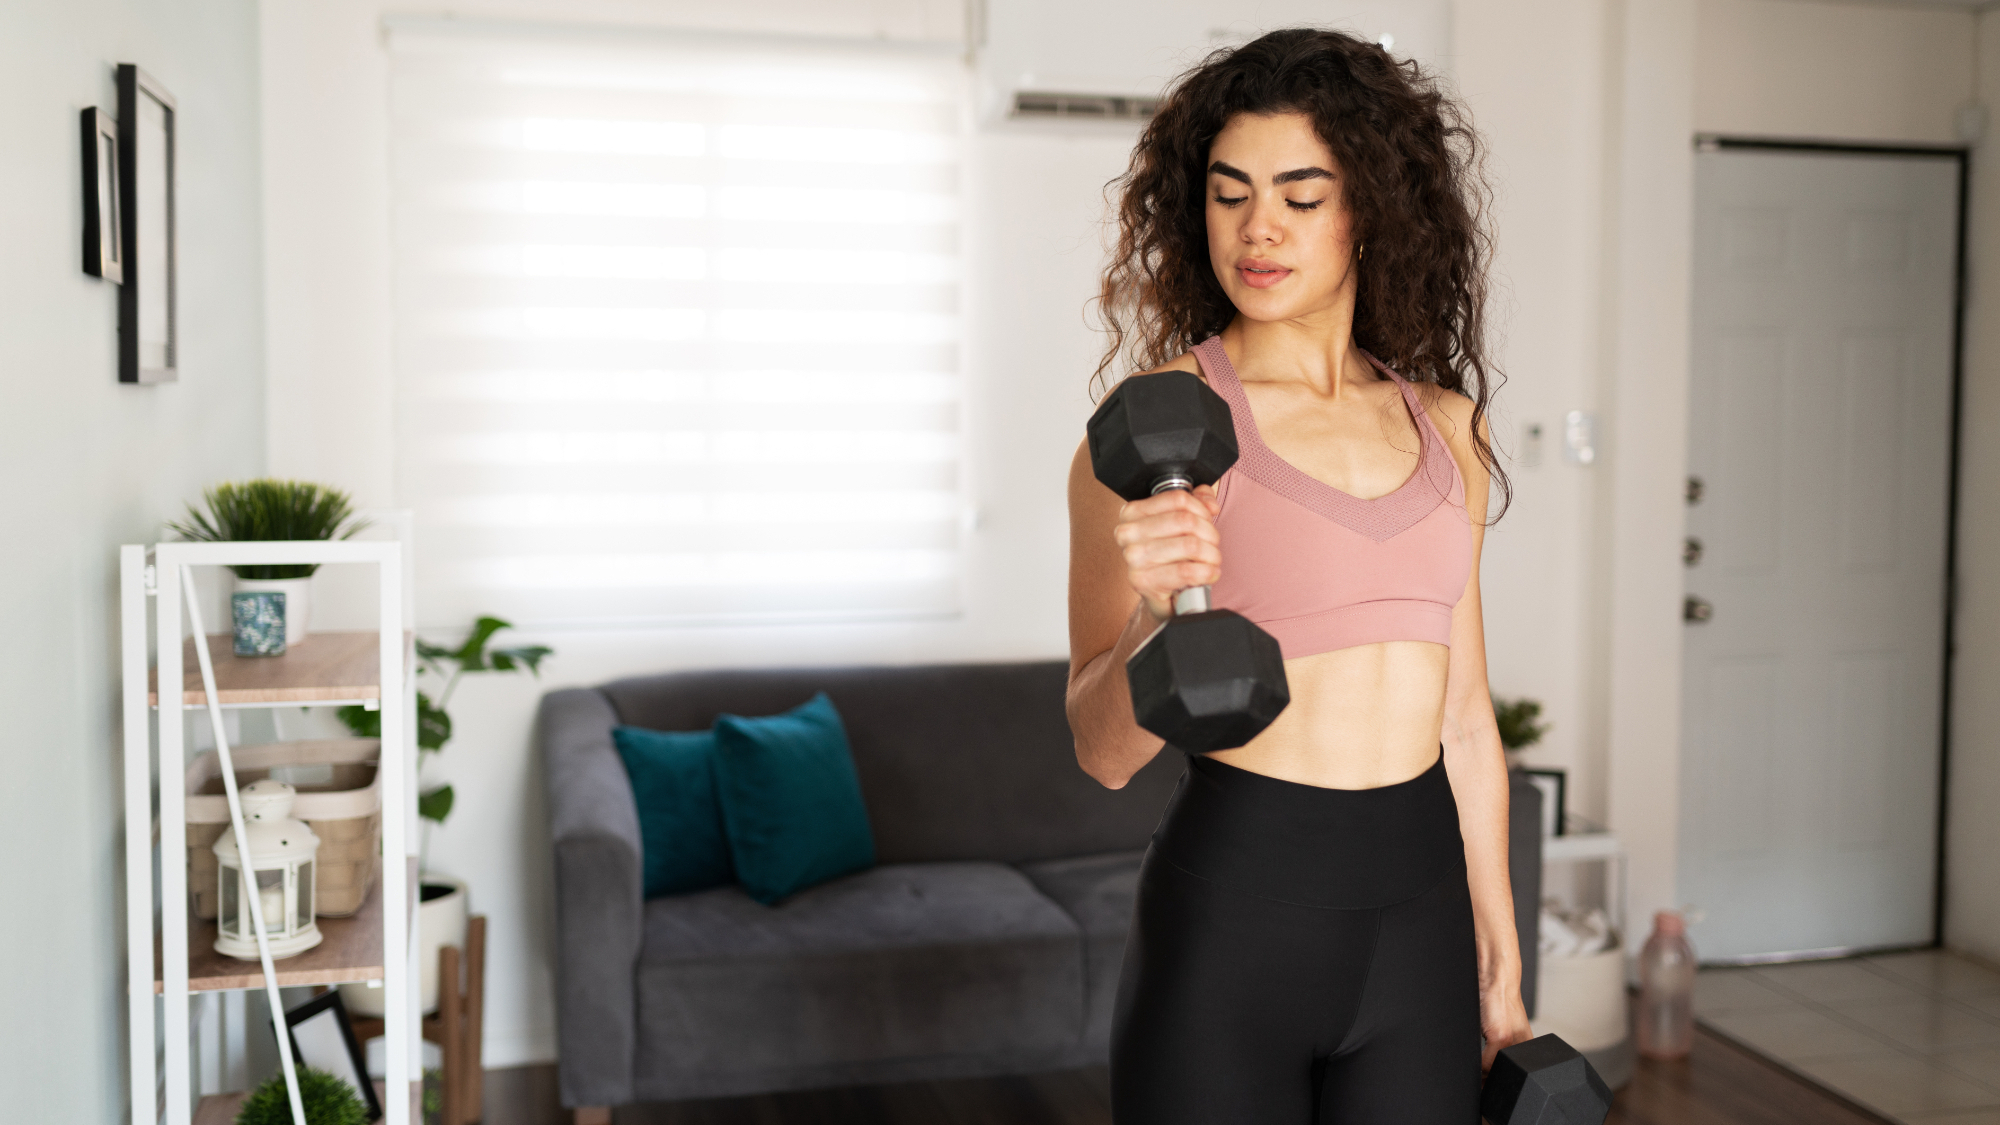 A woman performs an alternating hammer curl with dumbbells